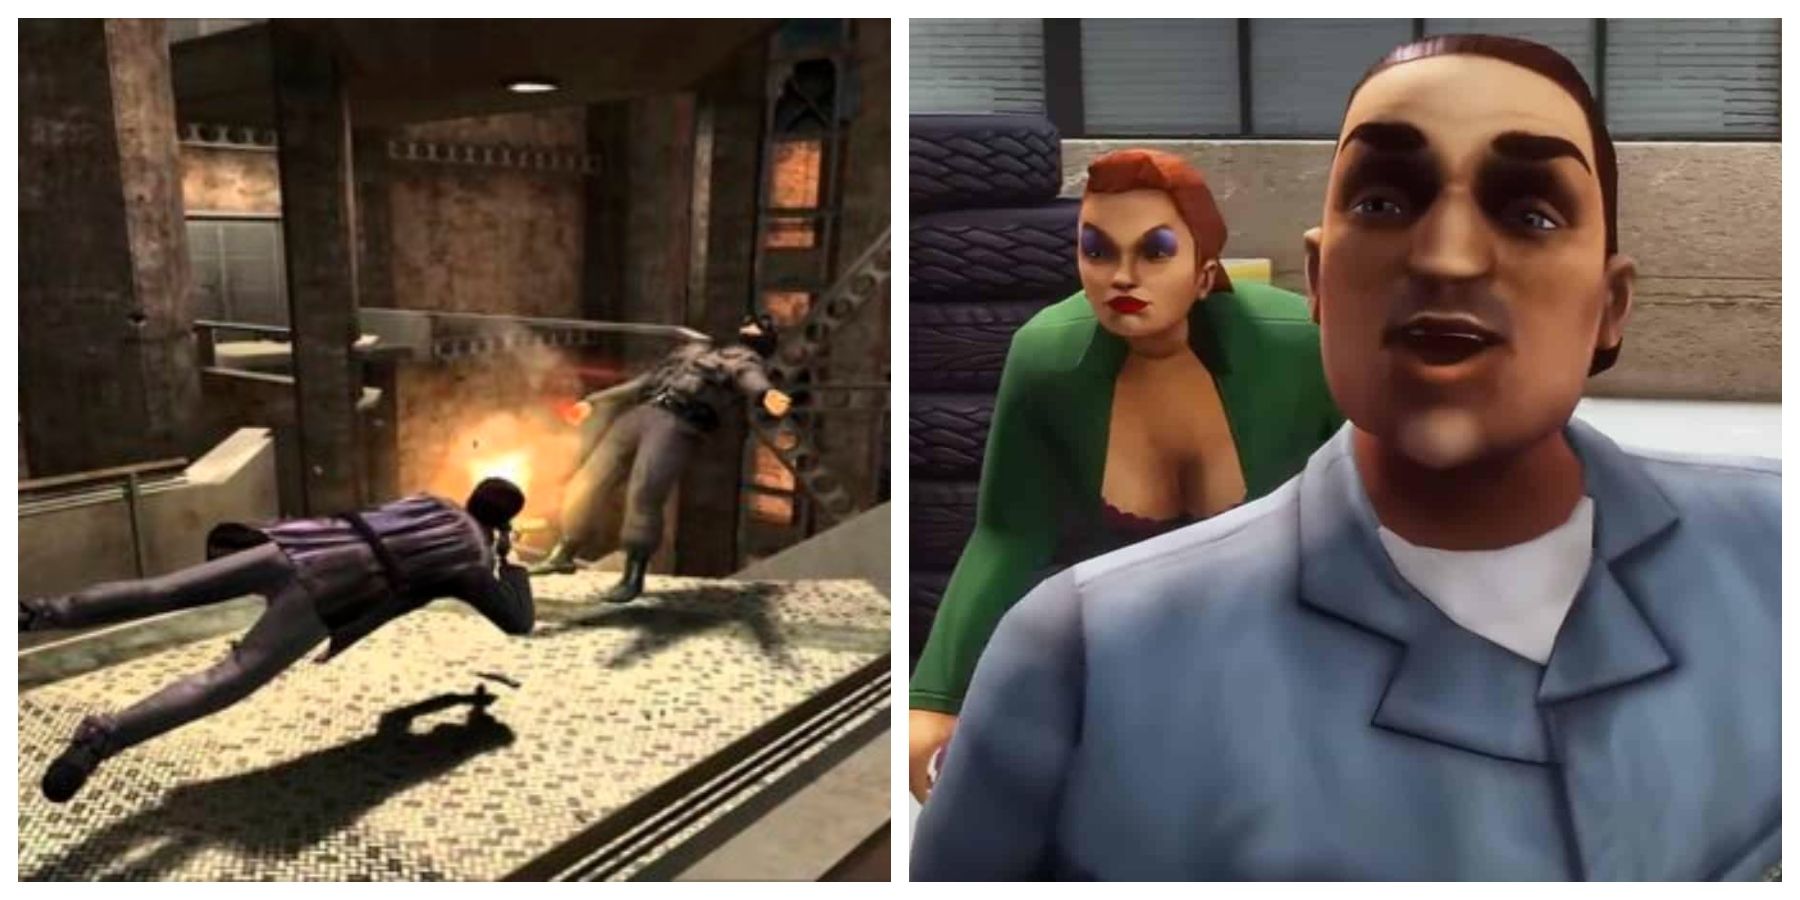 Why Max Payne Remakes Should Be Better Than Rockstar's GTA Trilogy - Max Payne 2 and GTA 3 Definitive